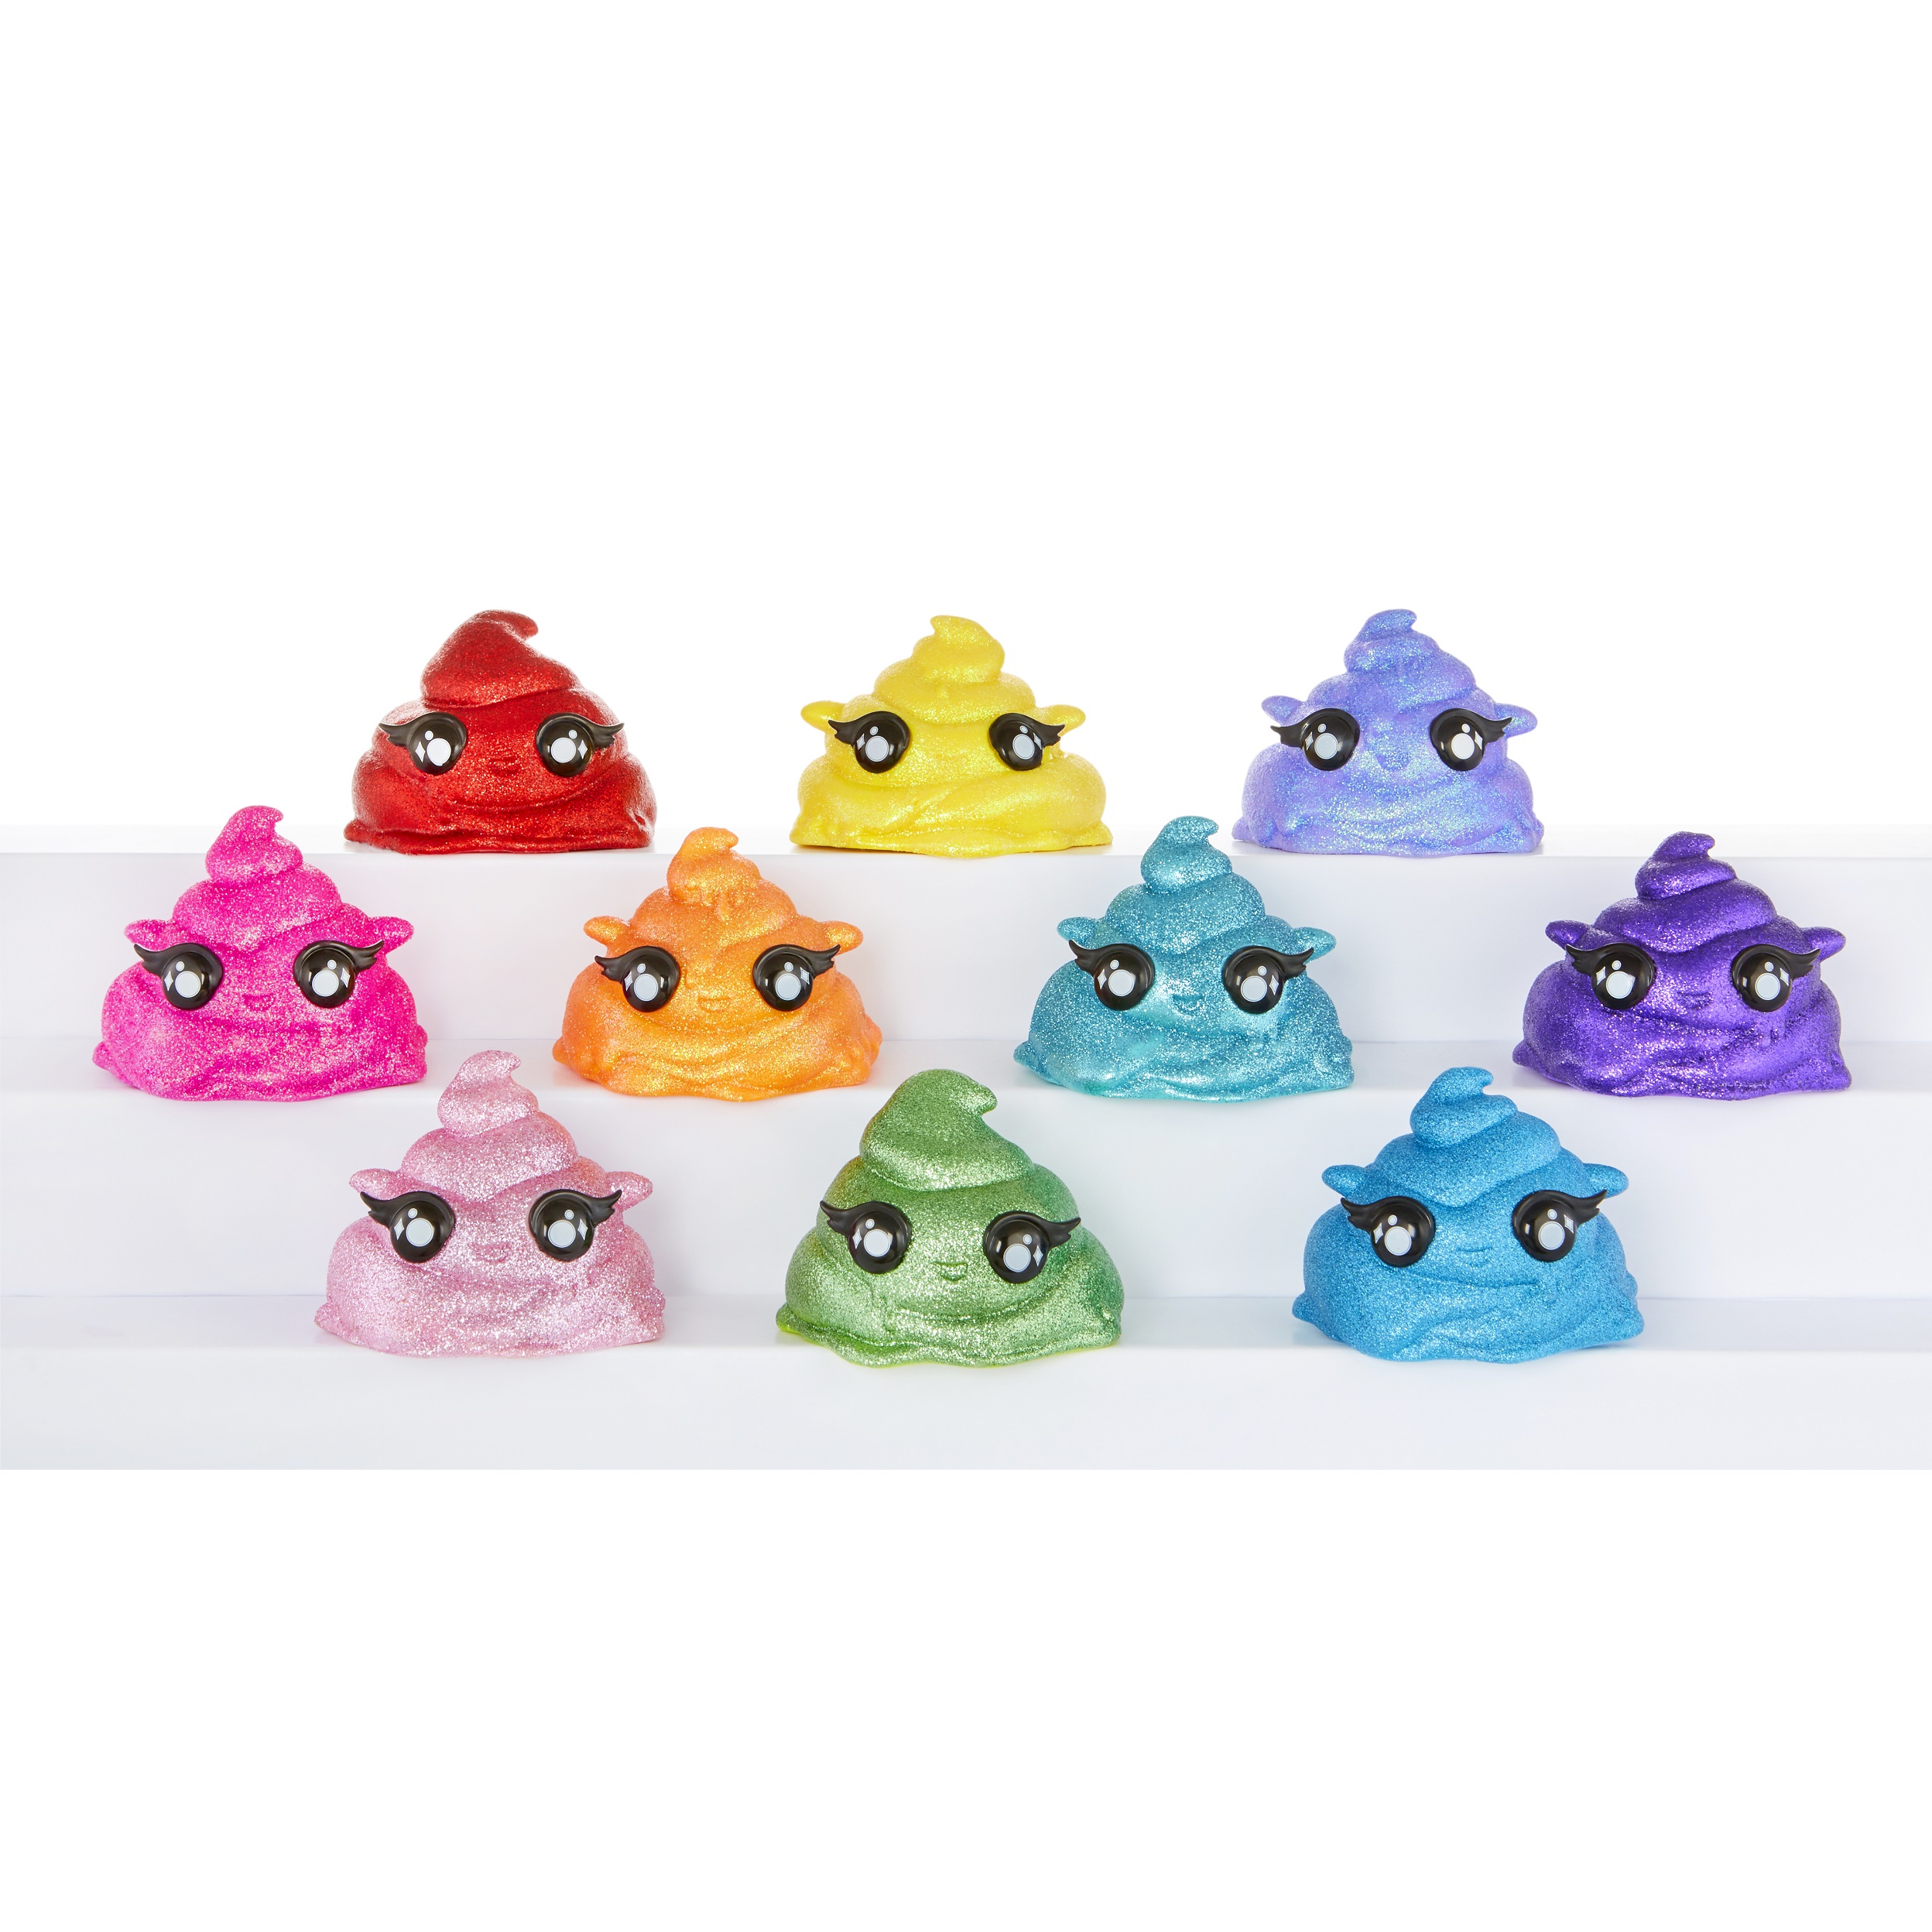 Poopsie Cutie Tooties Surprise Collectible Slime & Mystery Character Wave 1 - image 3 of 7